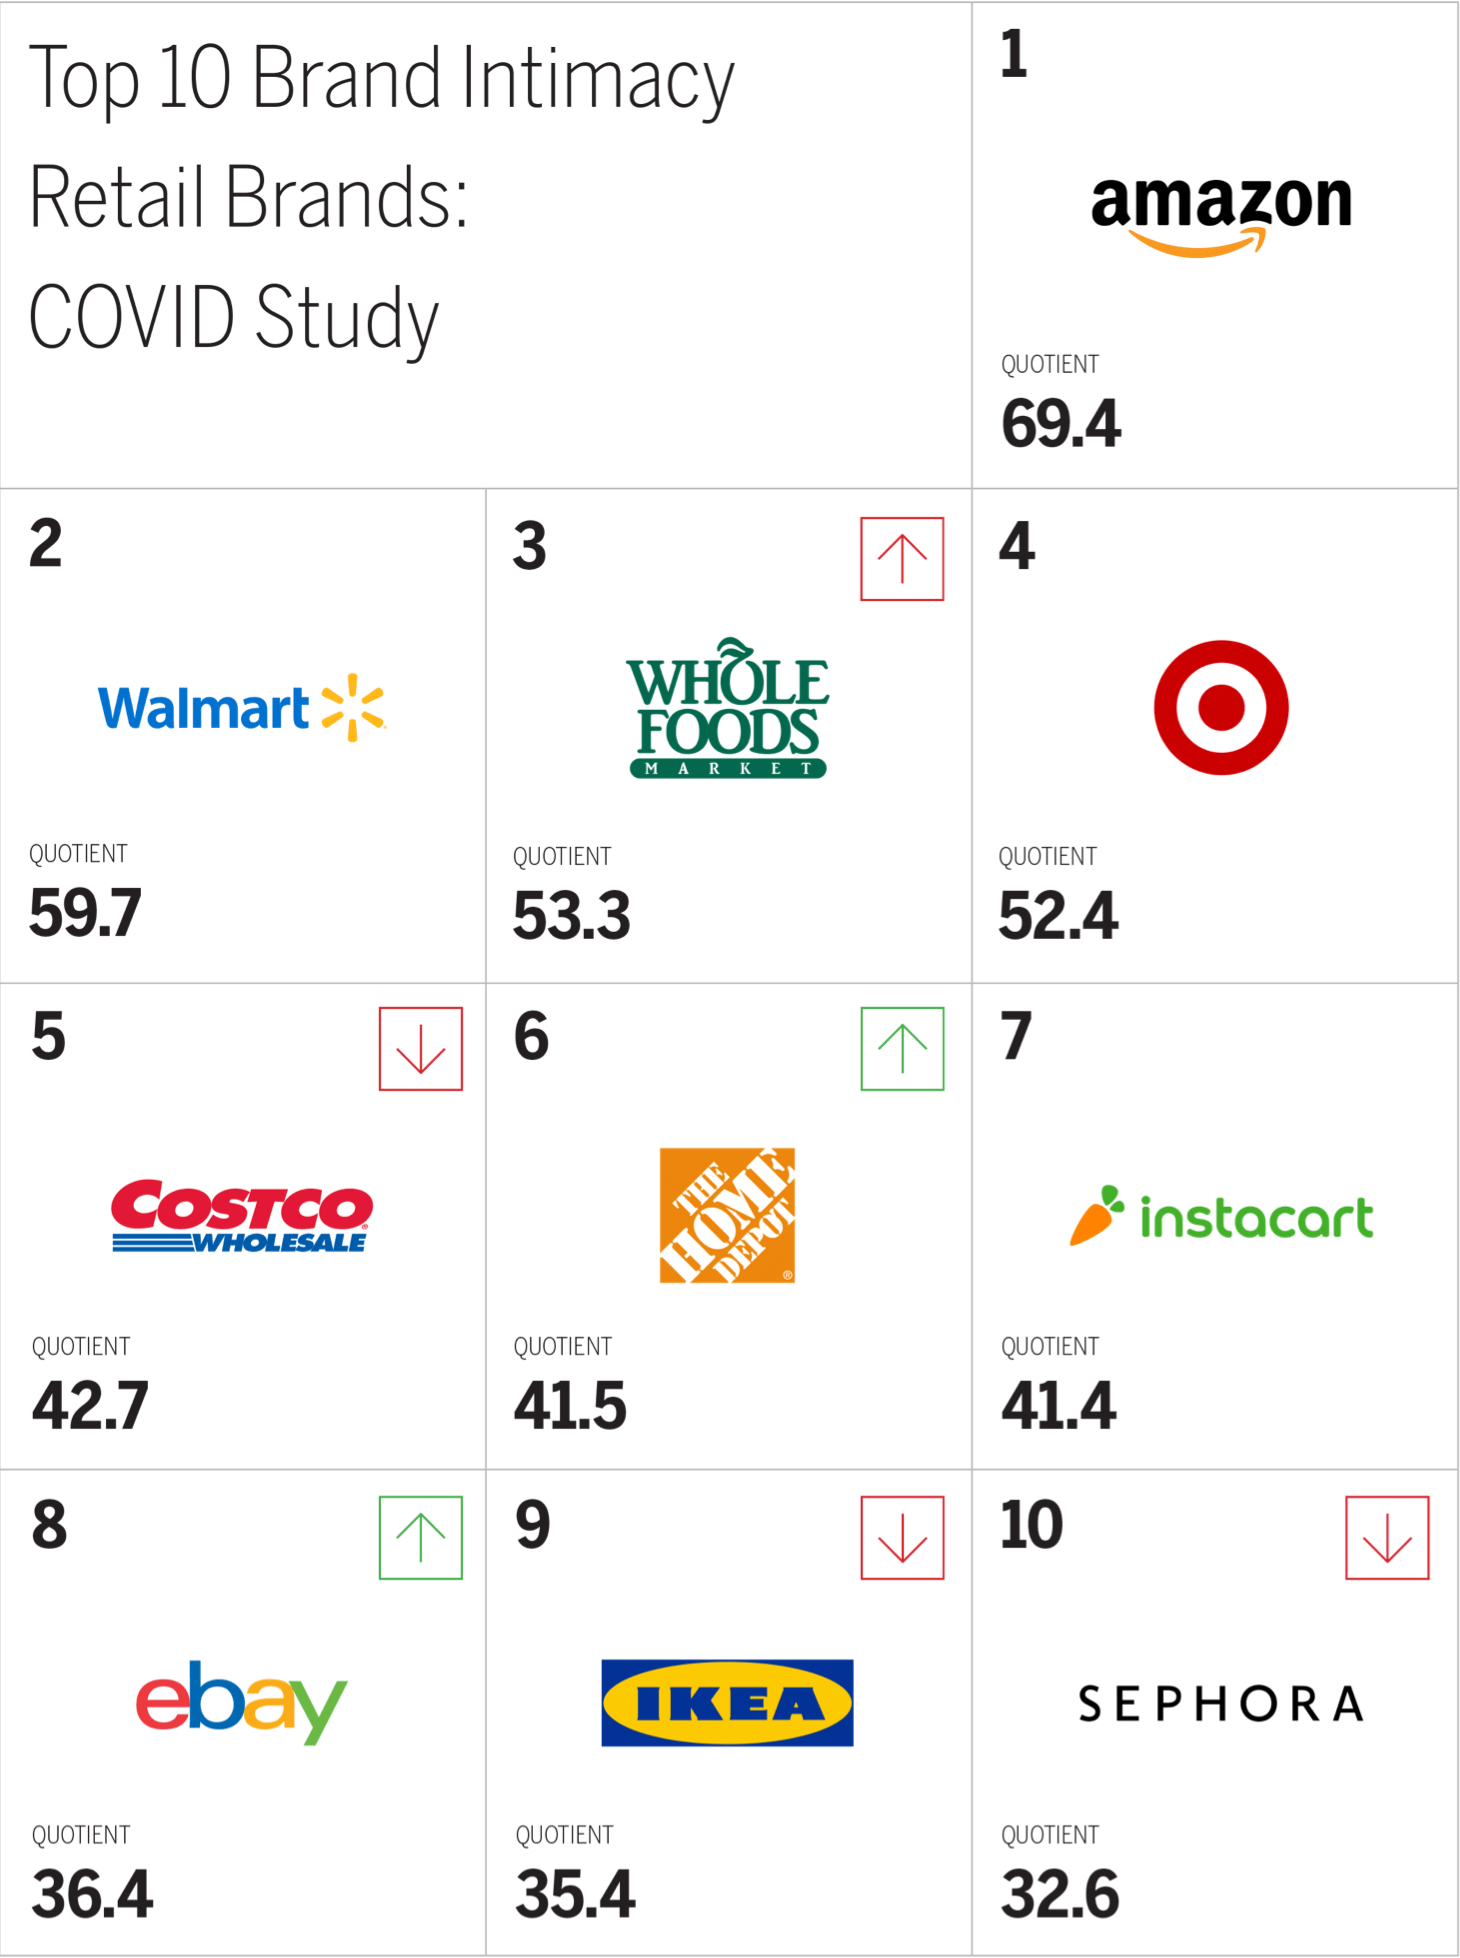 Top 10 Brand Intimacy Retail Brands:
COVID Study Chart